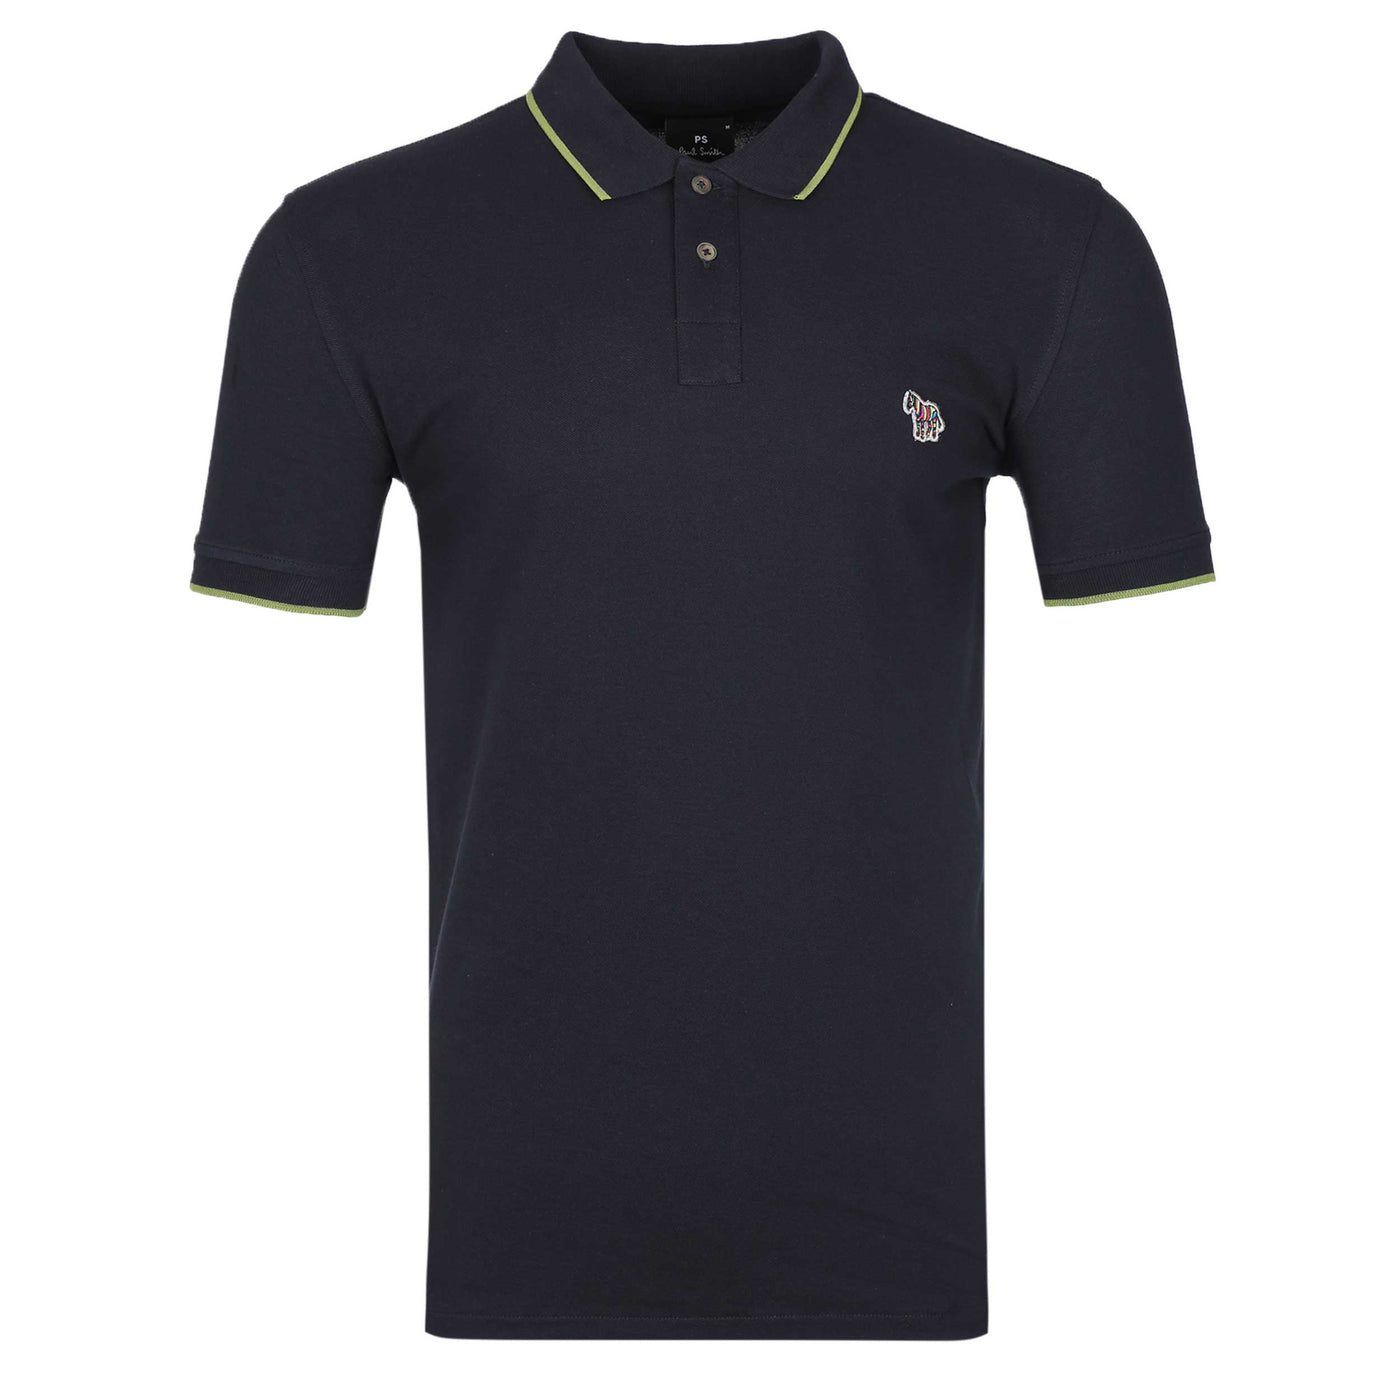 Paul Smith Zeb Badge Slim Fit Polo Shirt in Navy